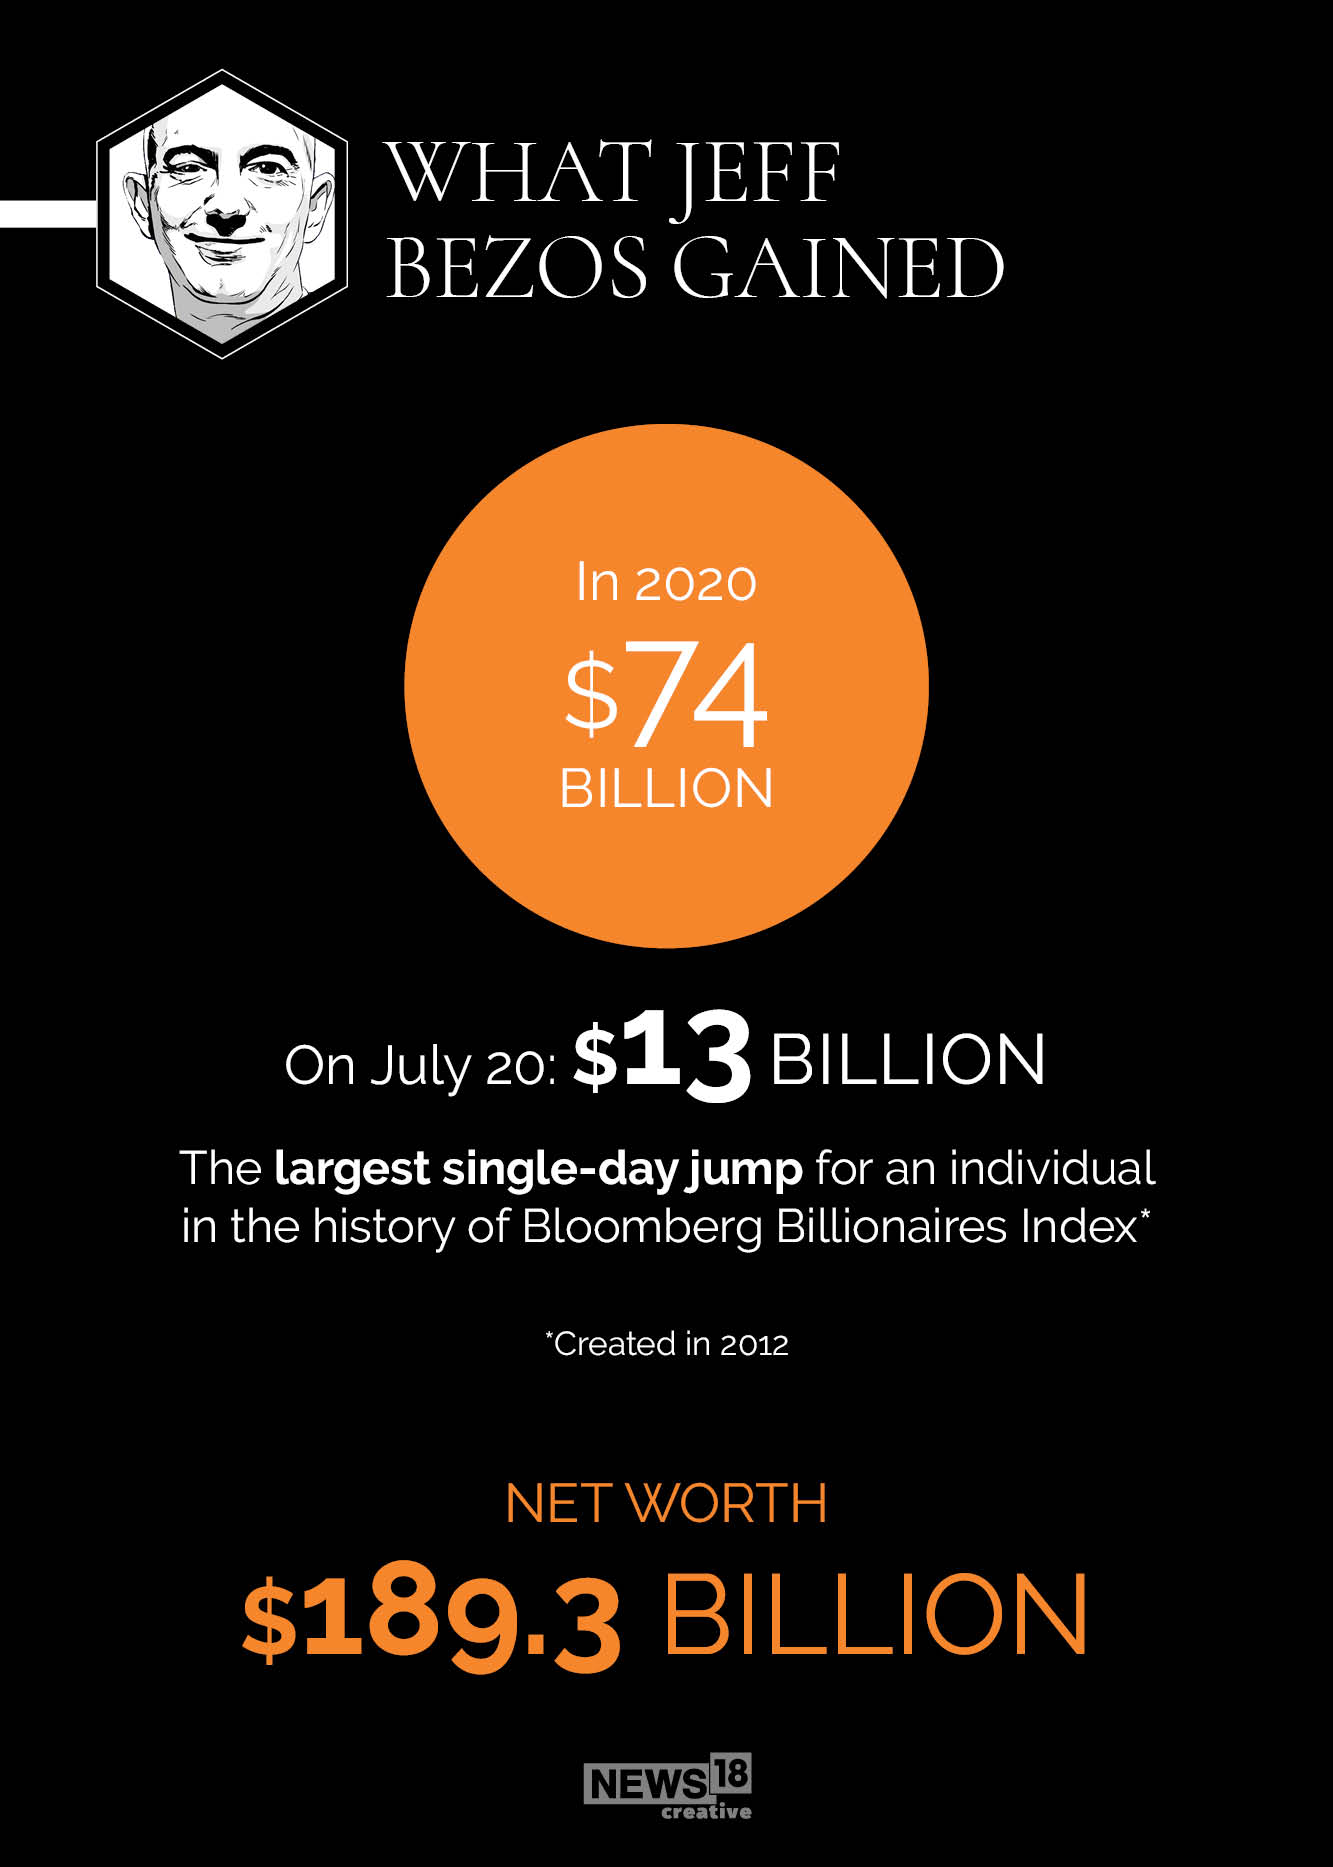 Jeff Bezos adds $13 bn to net worth in single day